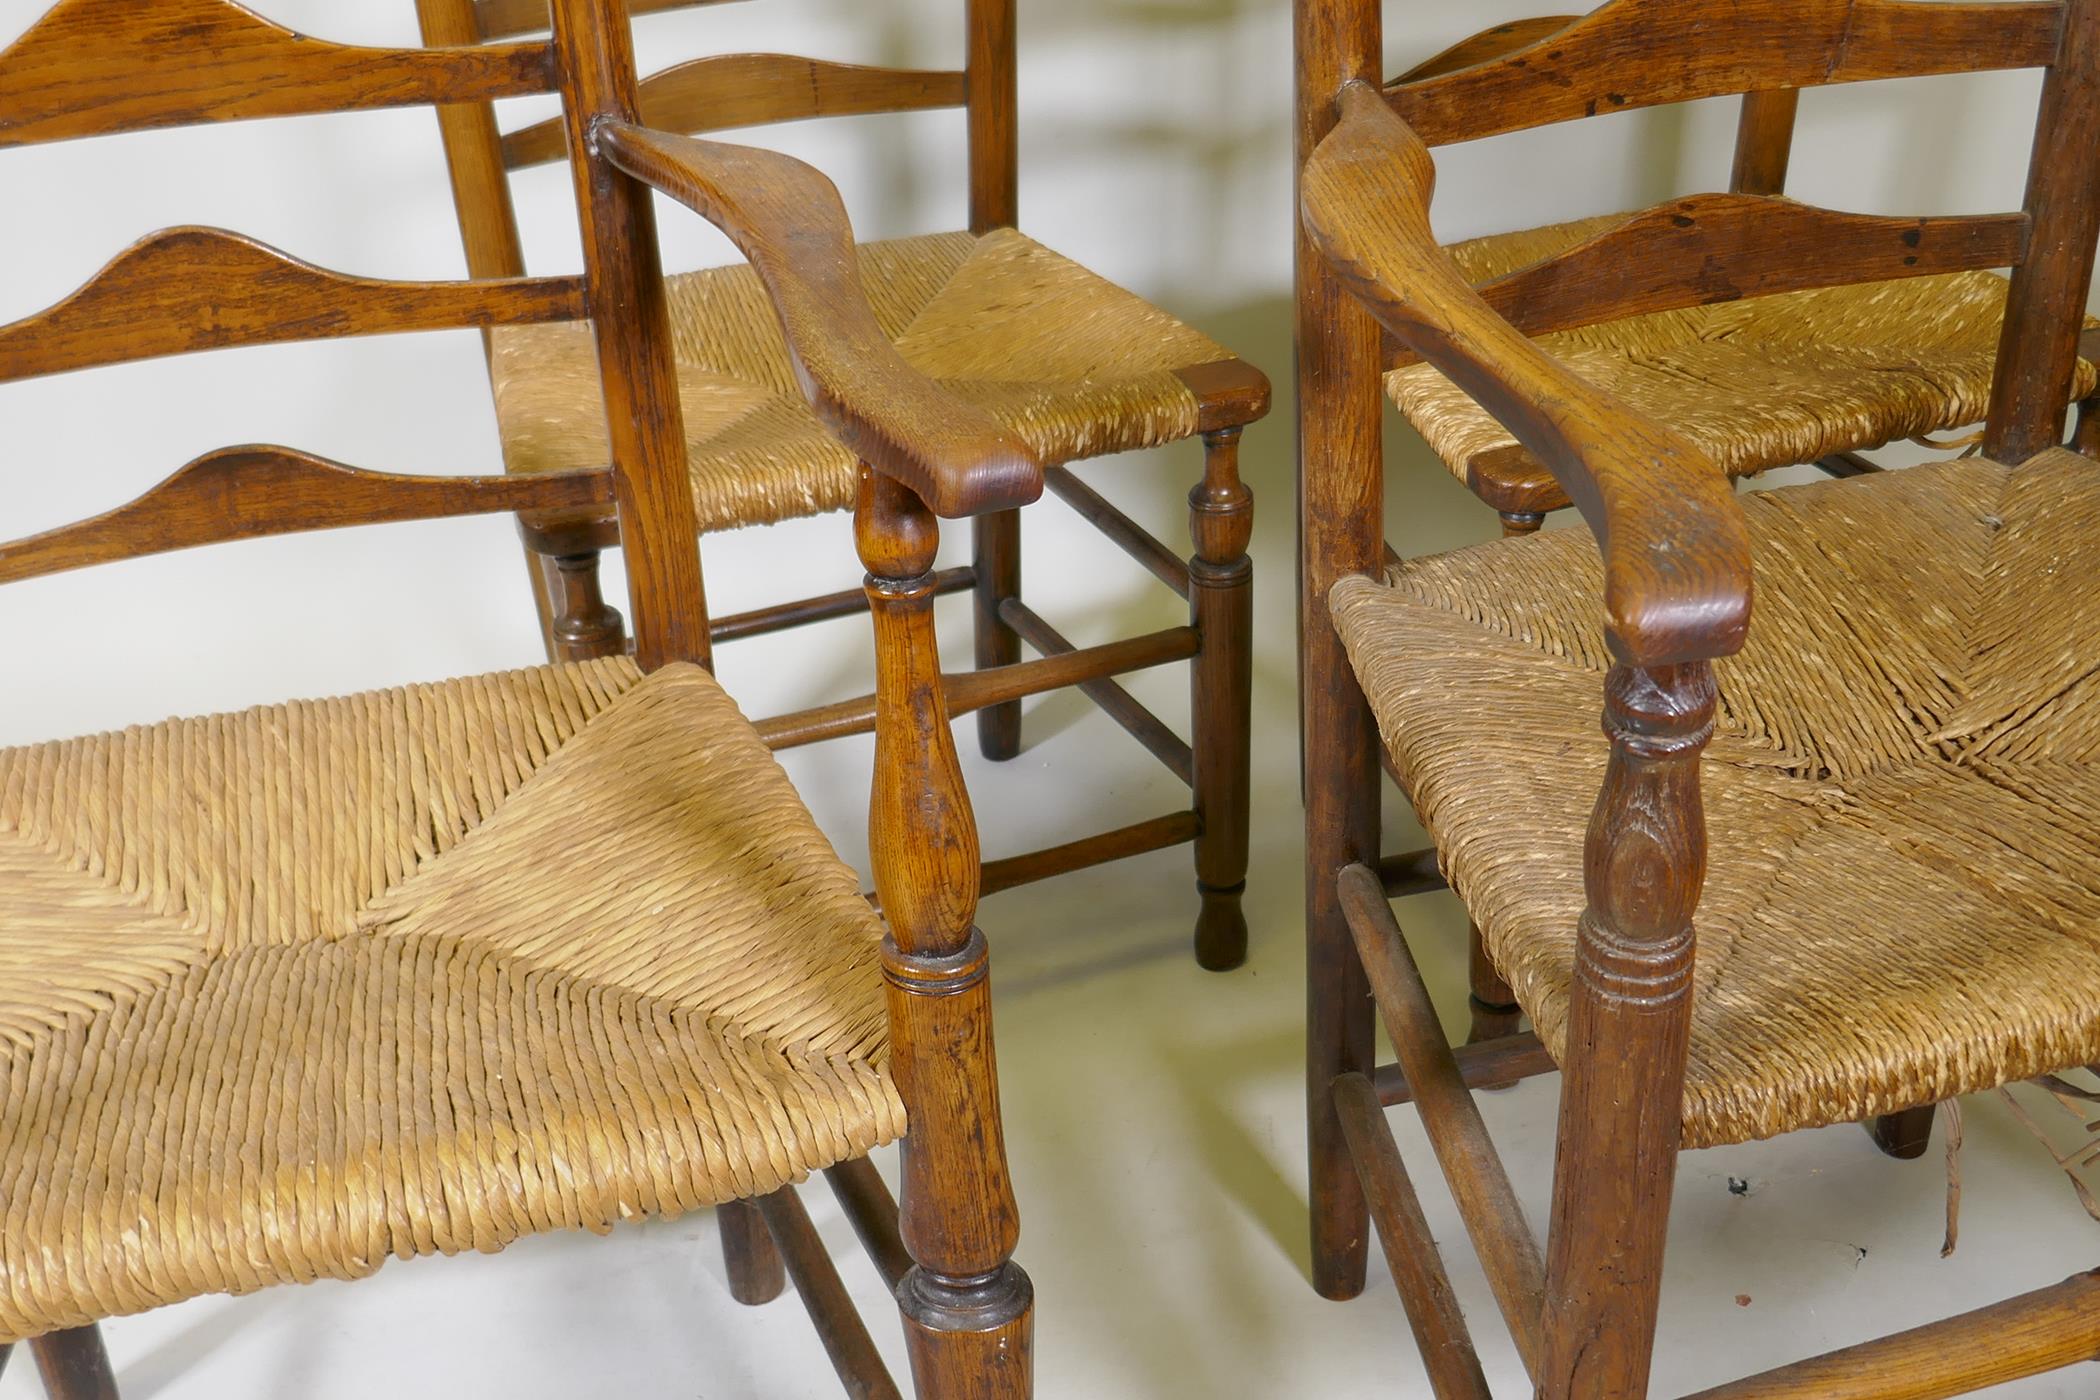 A set of six (4+2) ash ladderback chairs with rush seats, late C18th/early C19th - Image 4 of 4